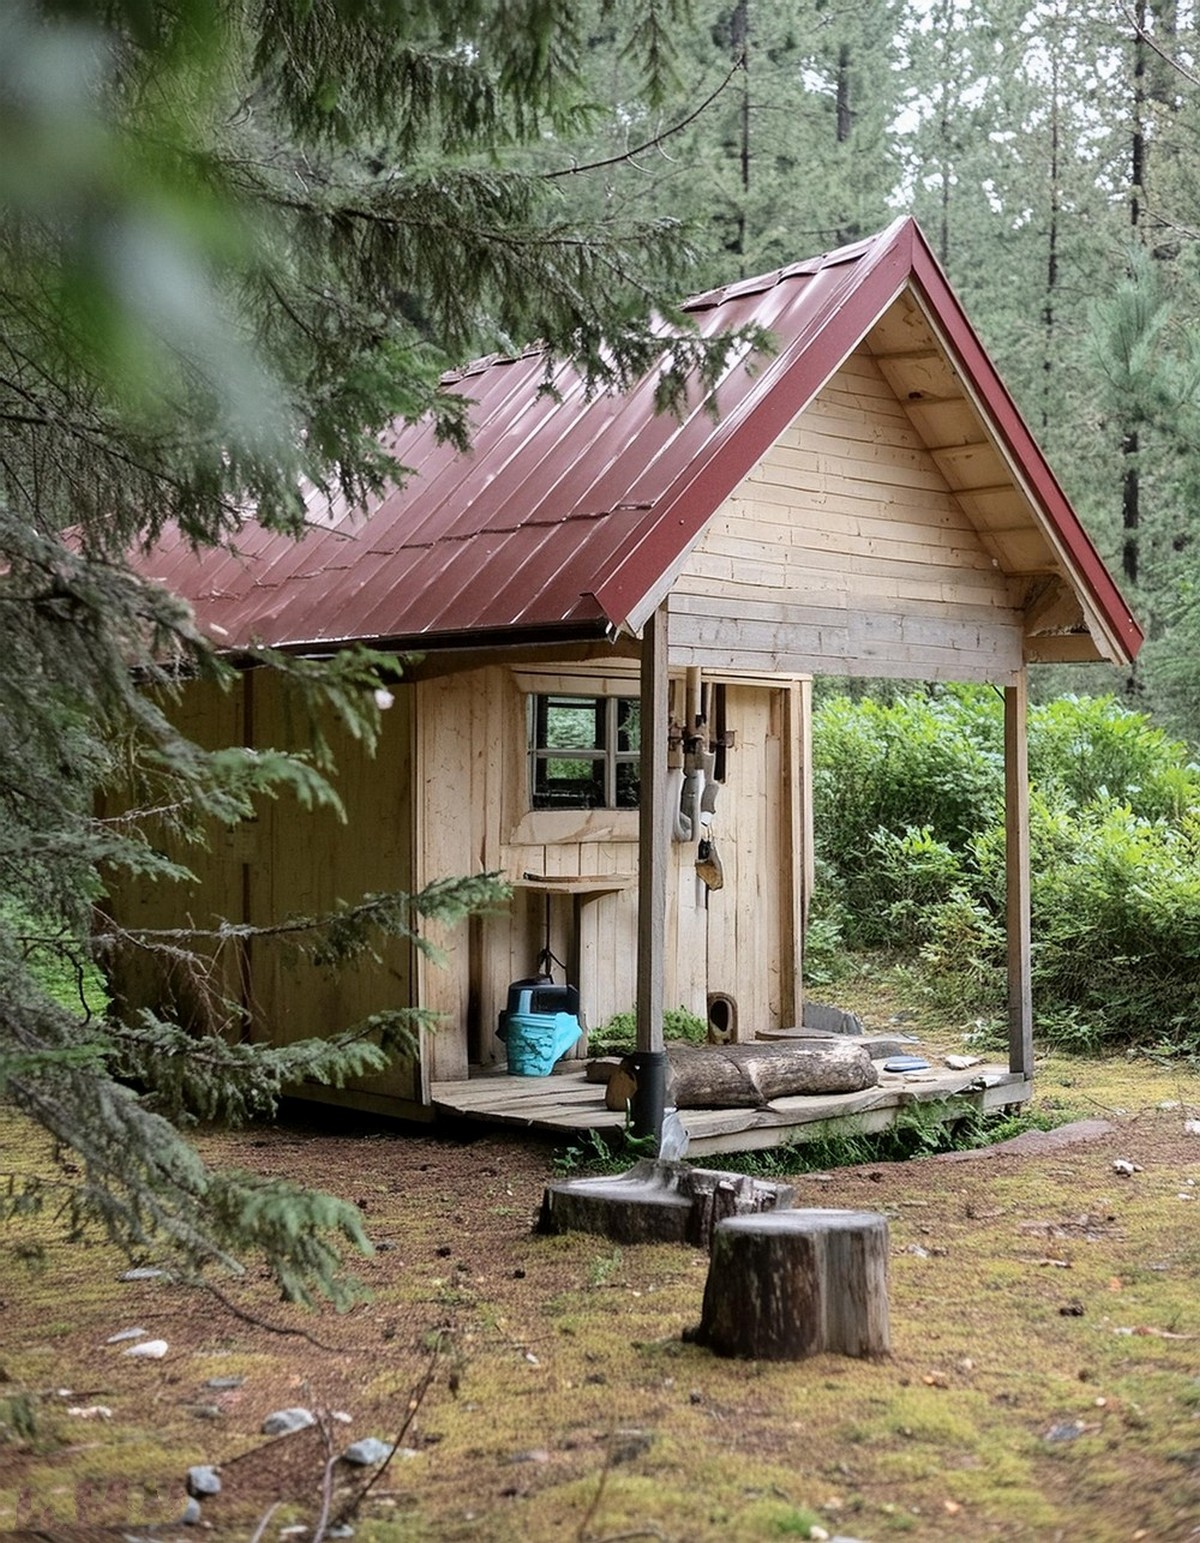 DIY Play House Project In Woods 4